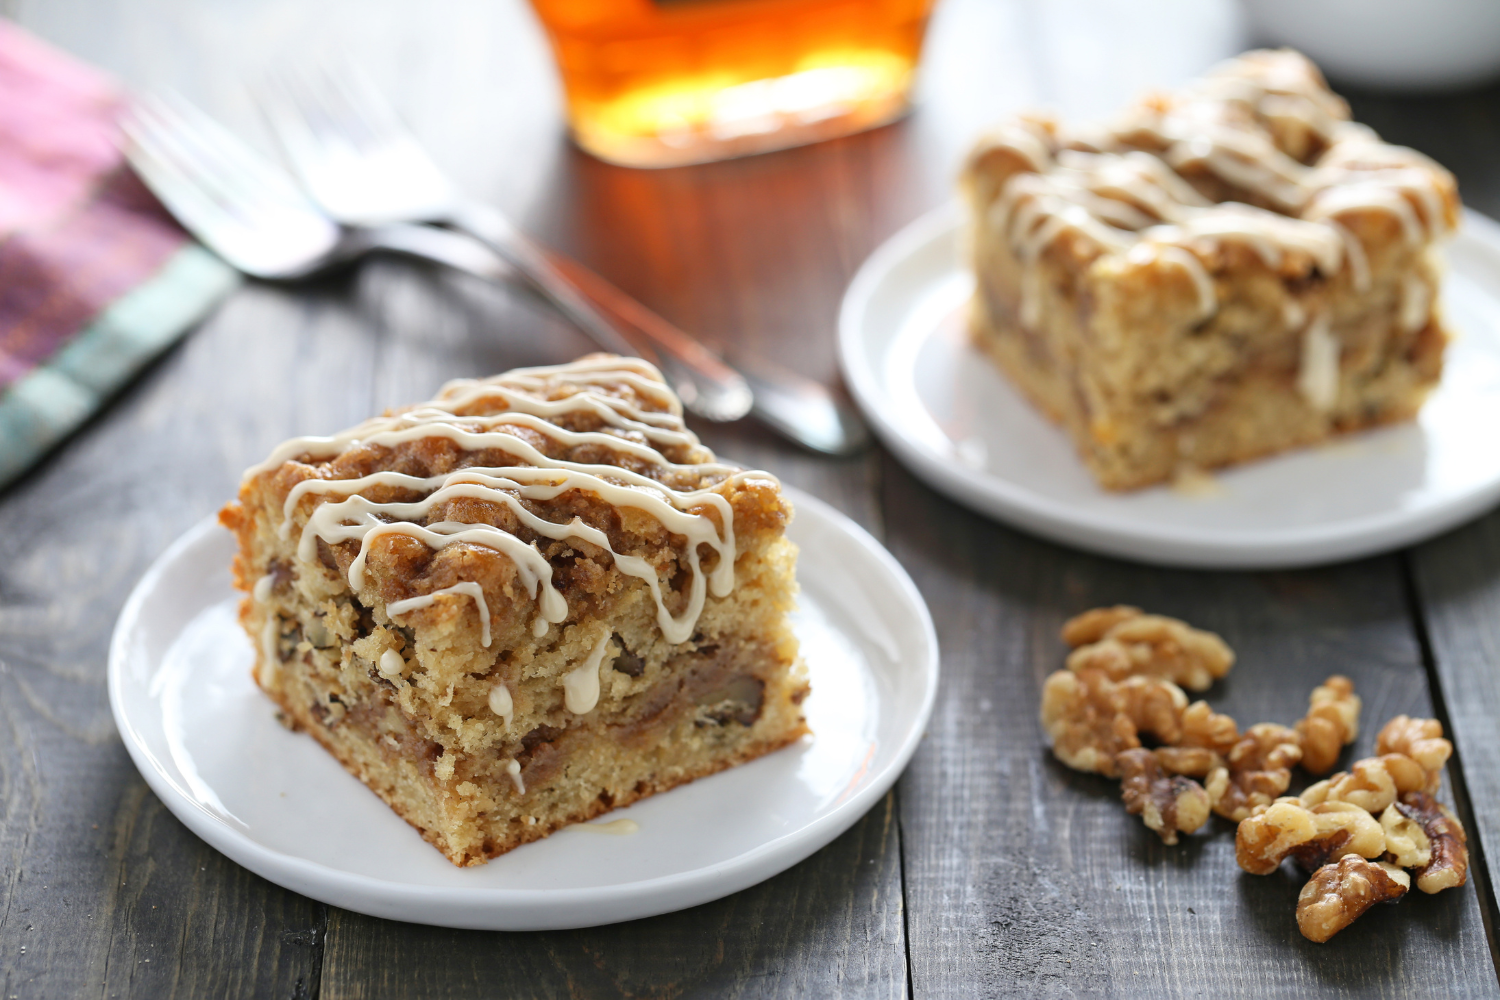 slices of maple walnut coffee cake on plates with forks, ready to serve